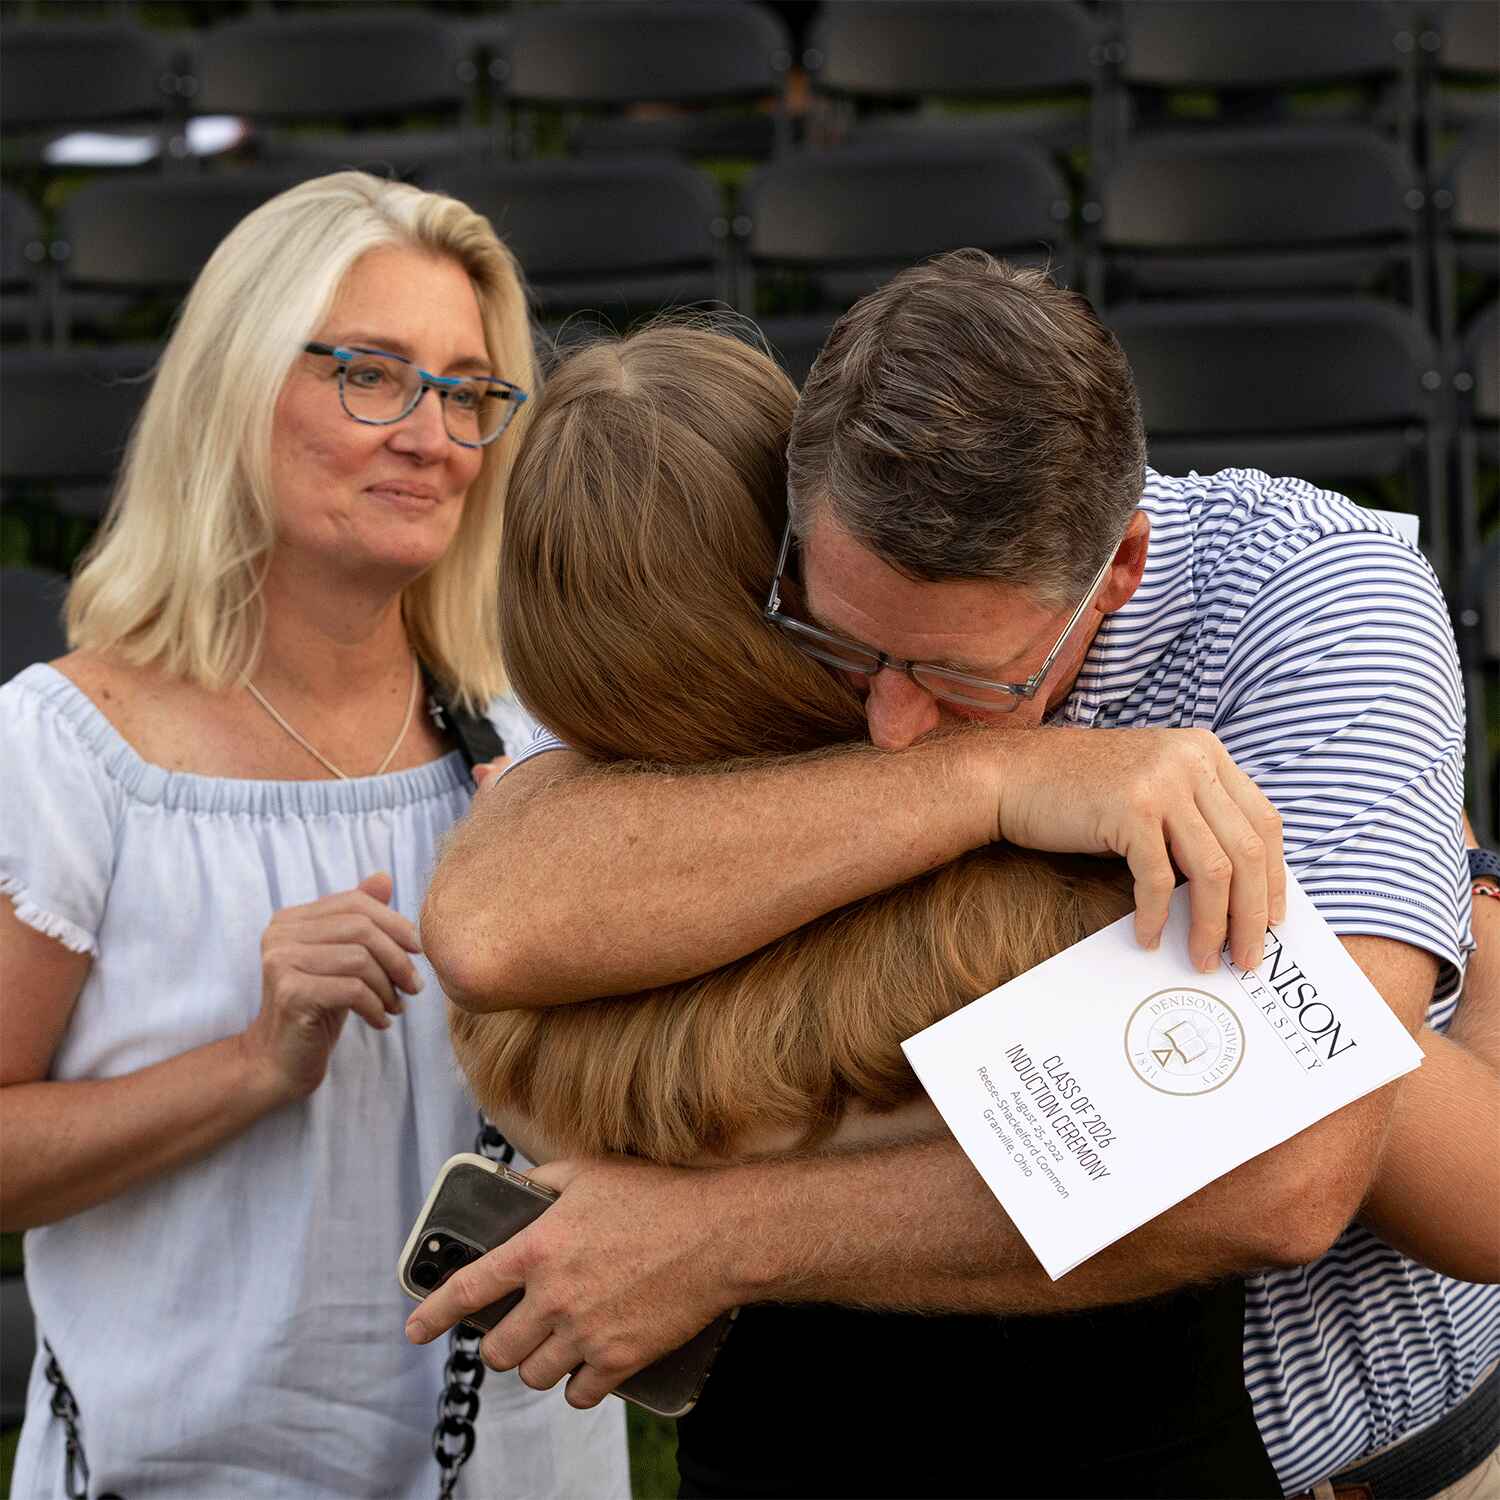 Parents drop their child off at college and hug goodbye